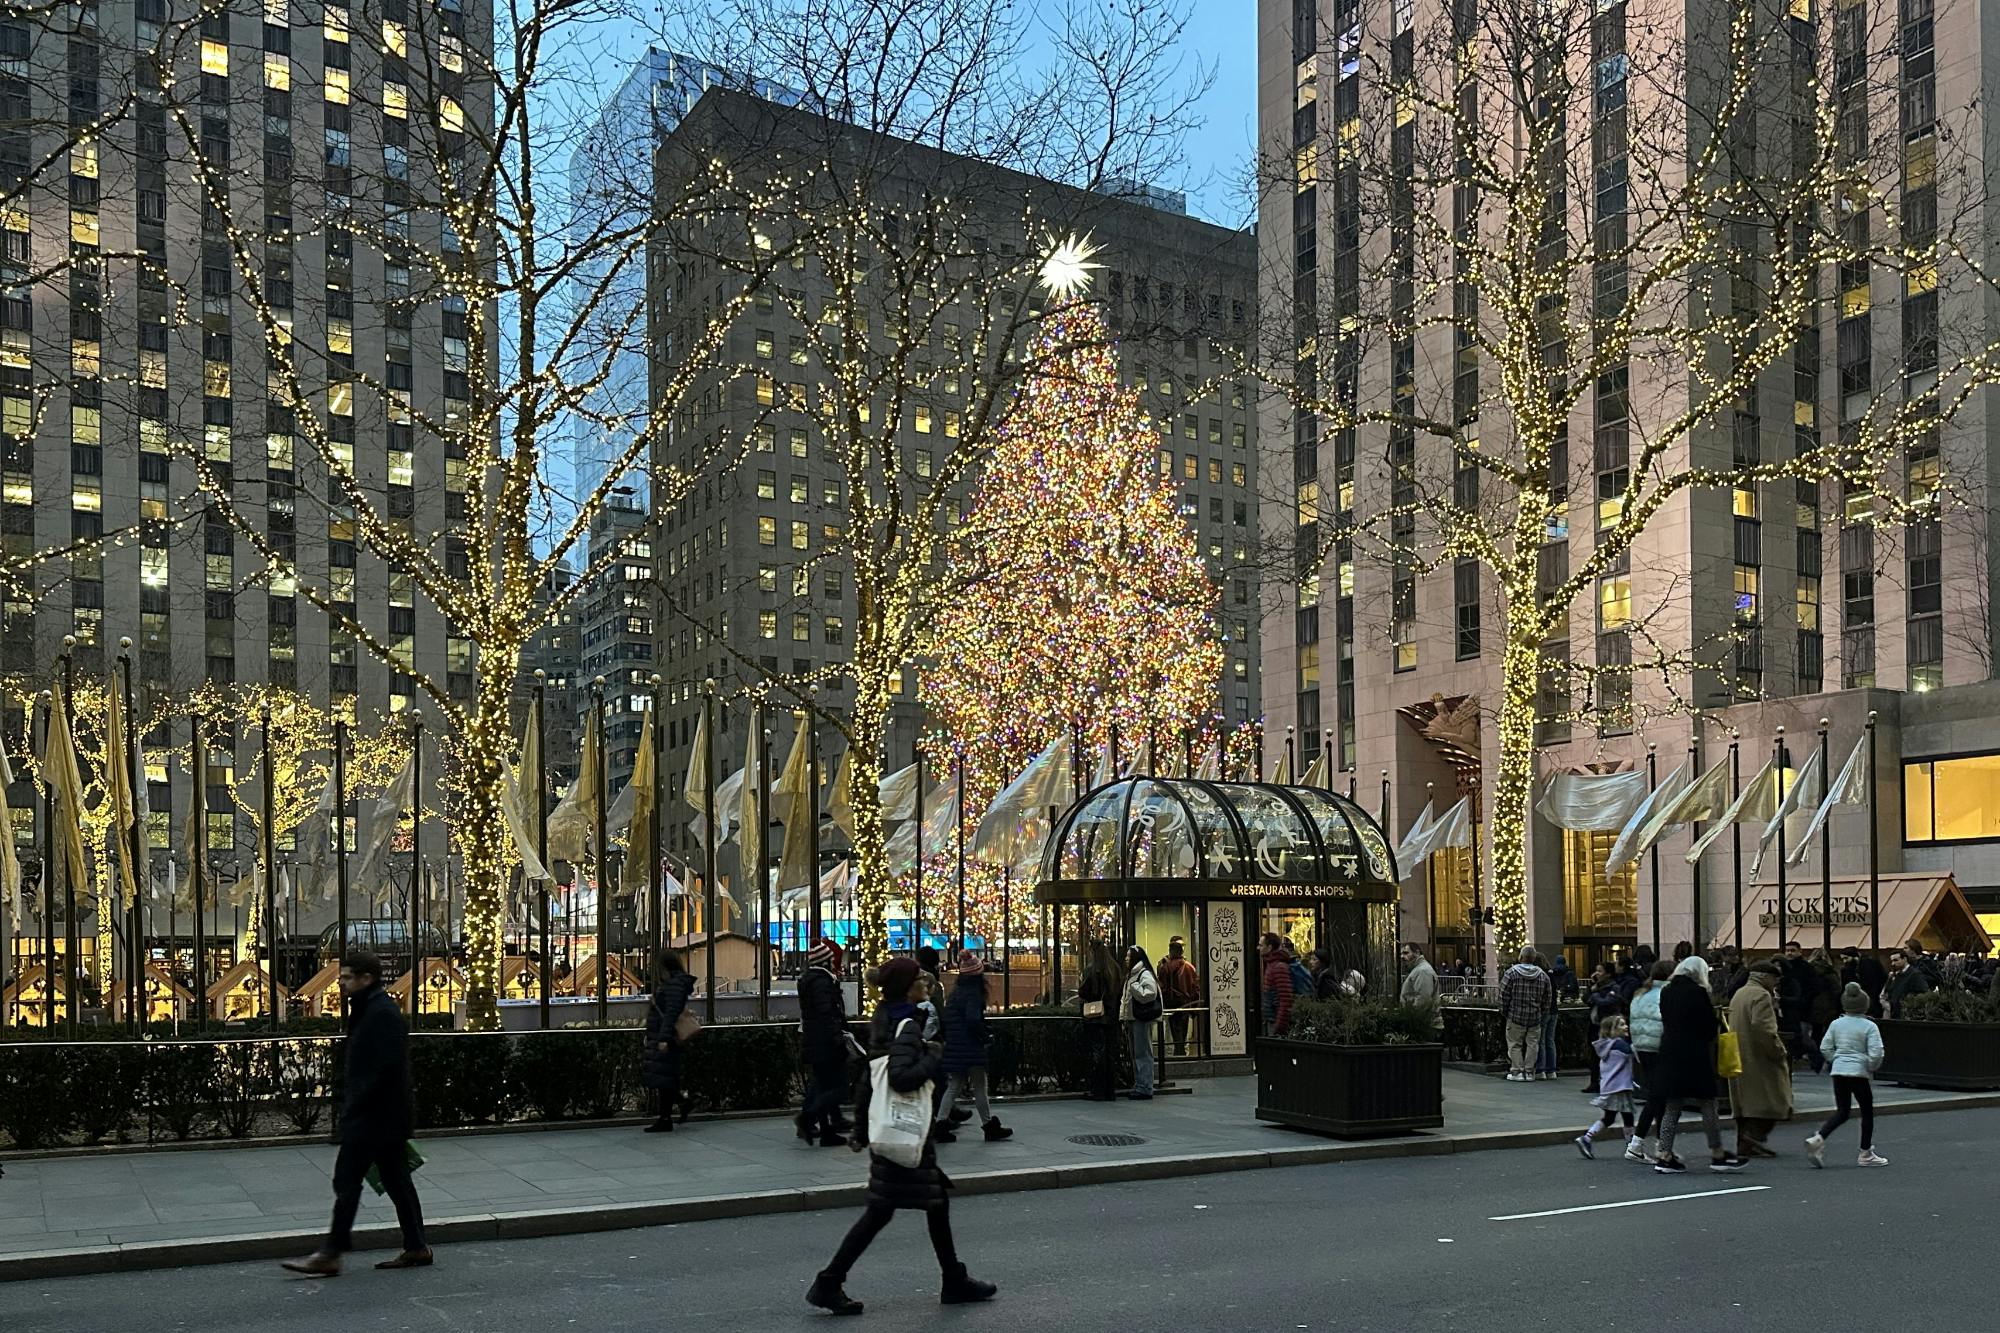 Rockefeller Center: Overview of an Iconic NYC Landmark